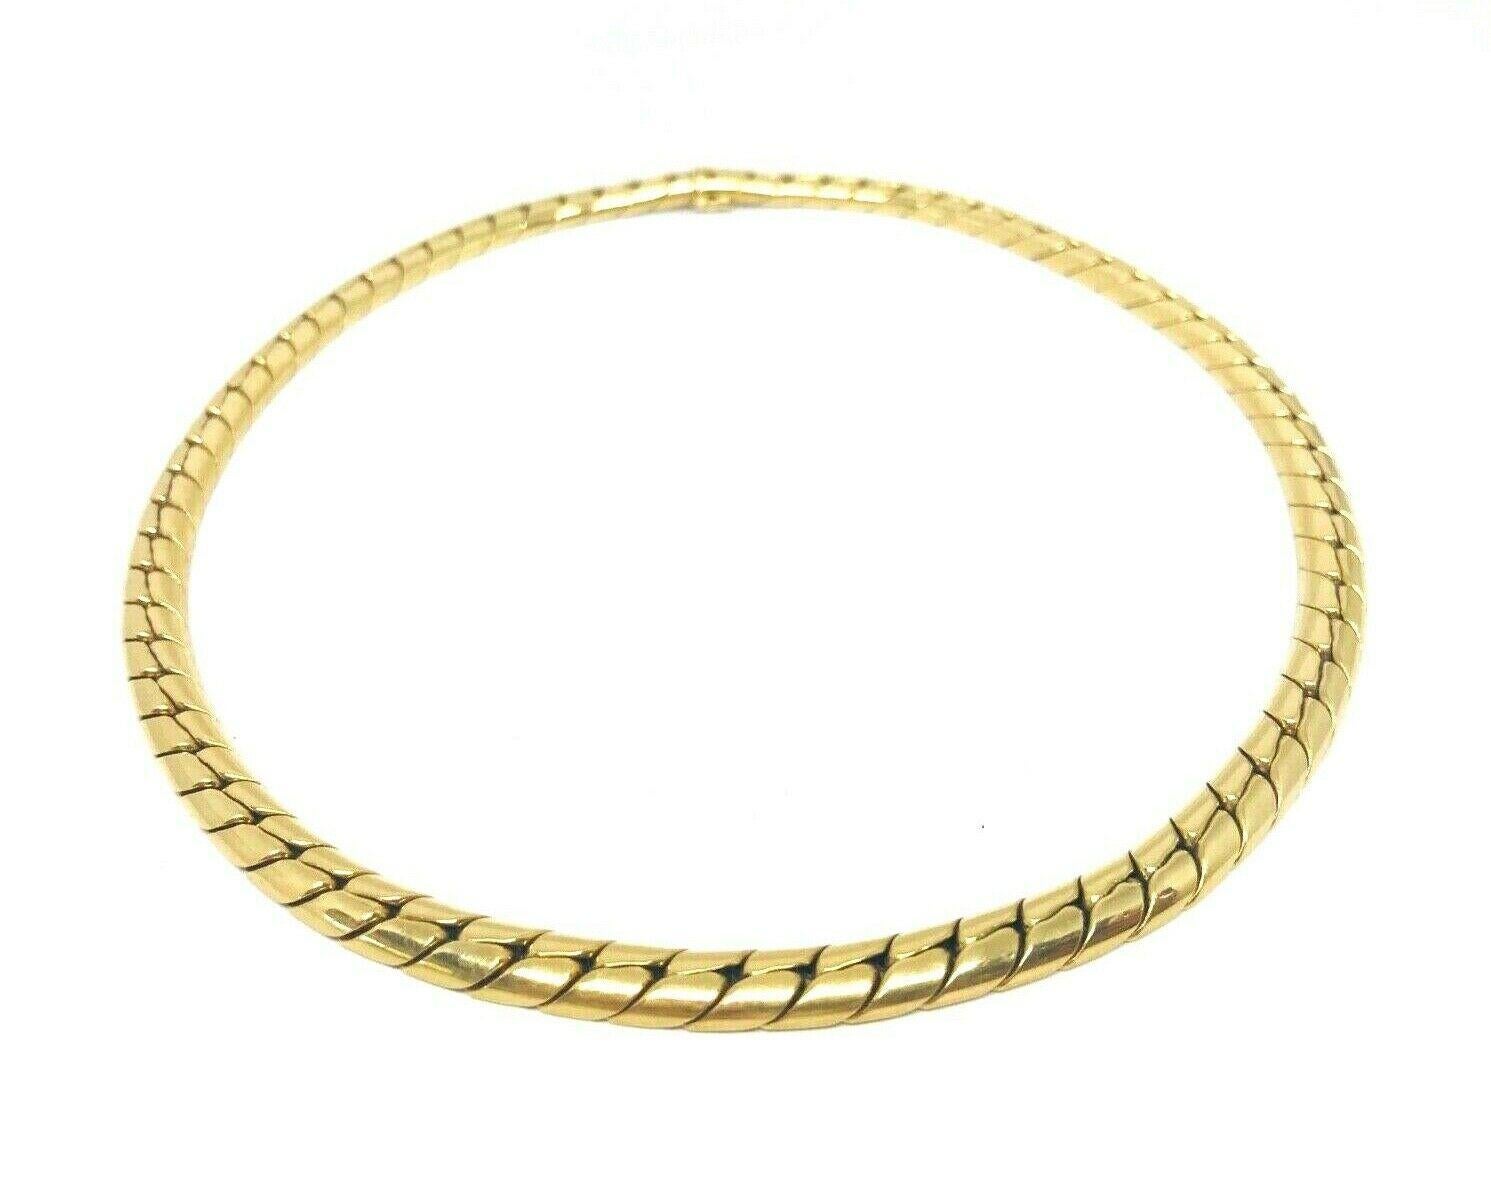 Chic French 18k yellow gold vintage choker necklace by Georges Lenfant. Stamped with the Georges Lenfant maker's mark and a French mark.
Measurements: 16